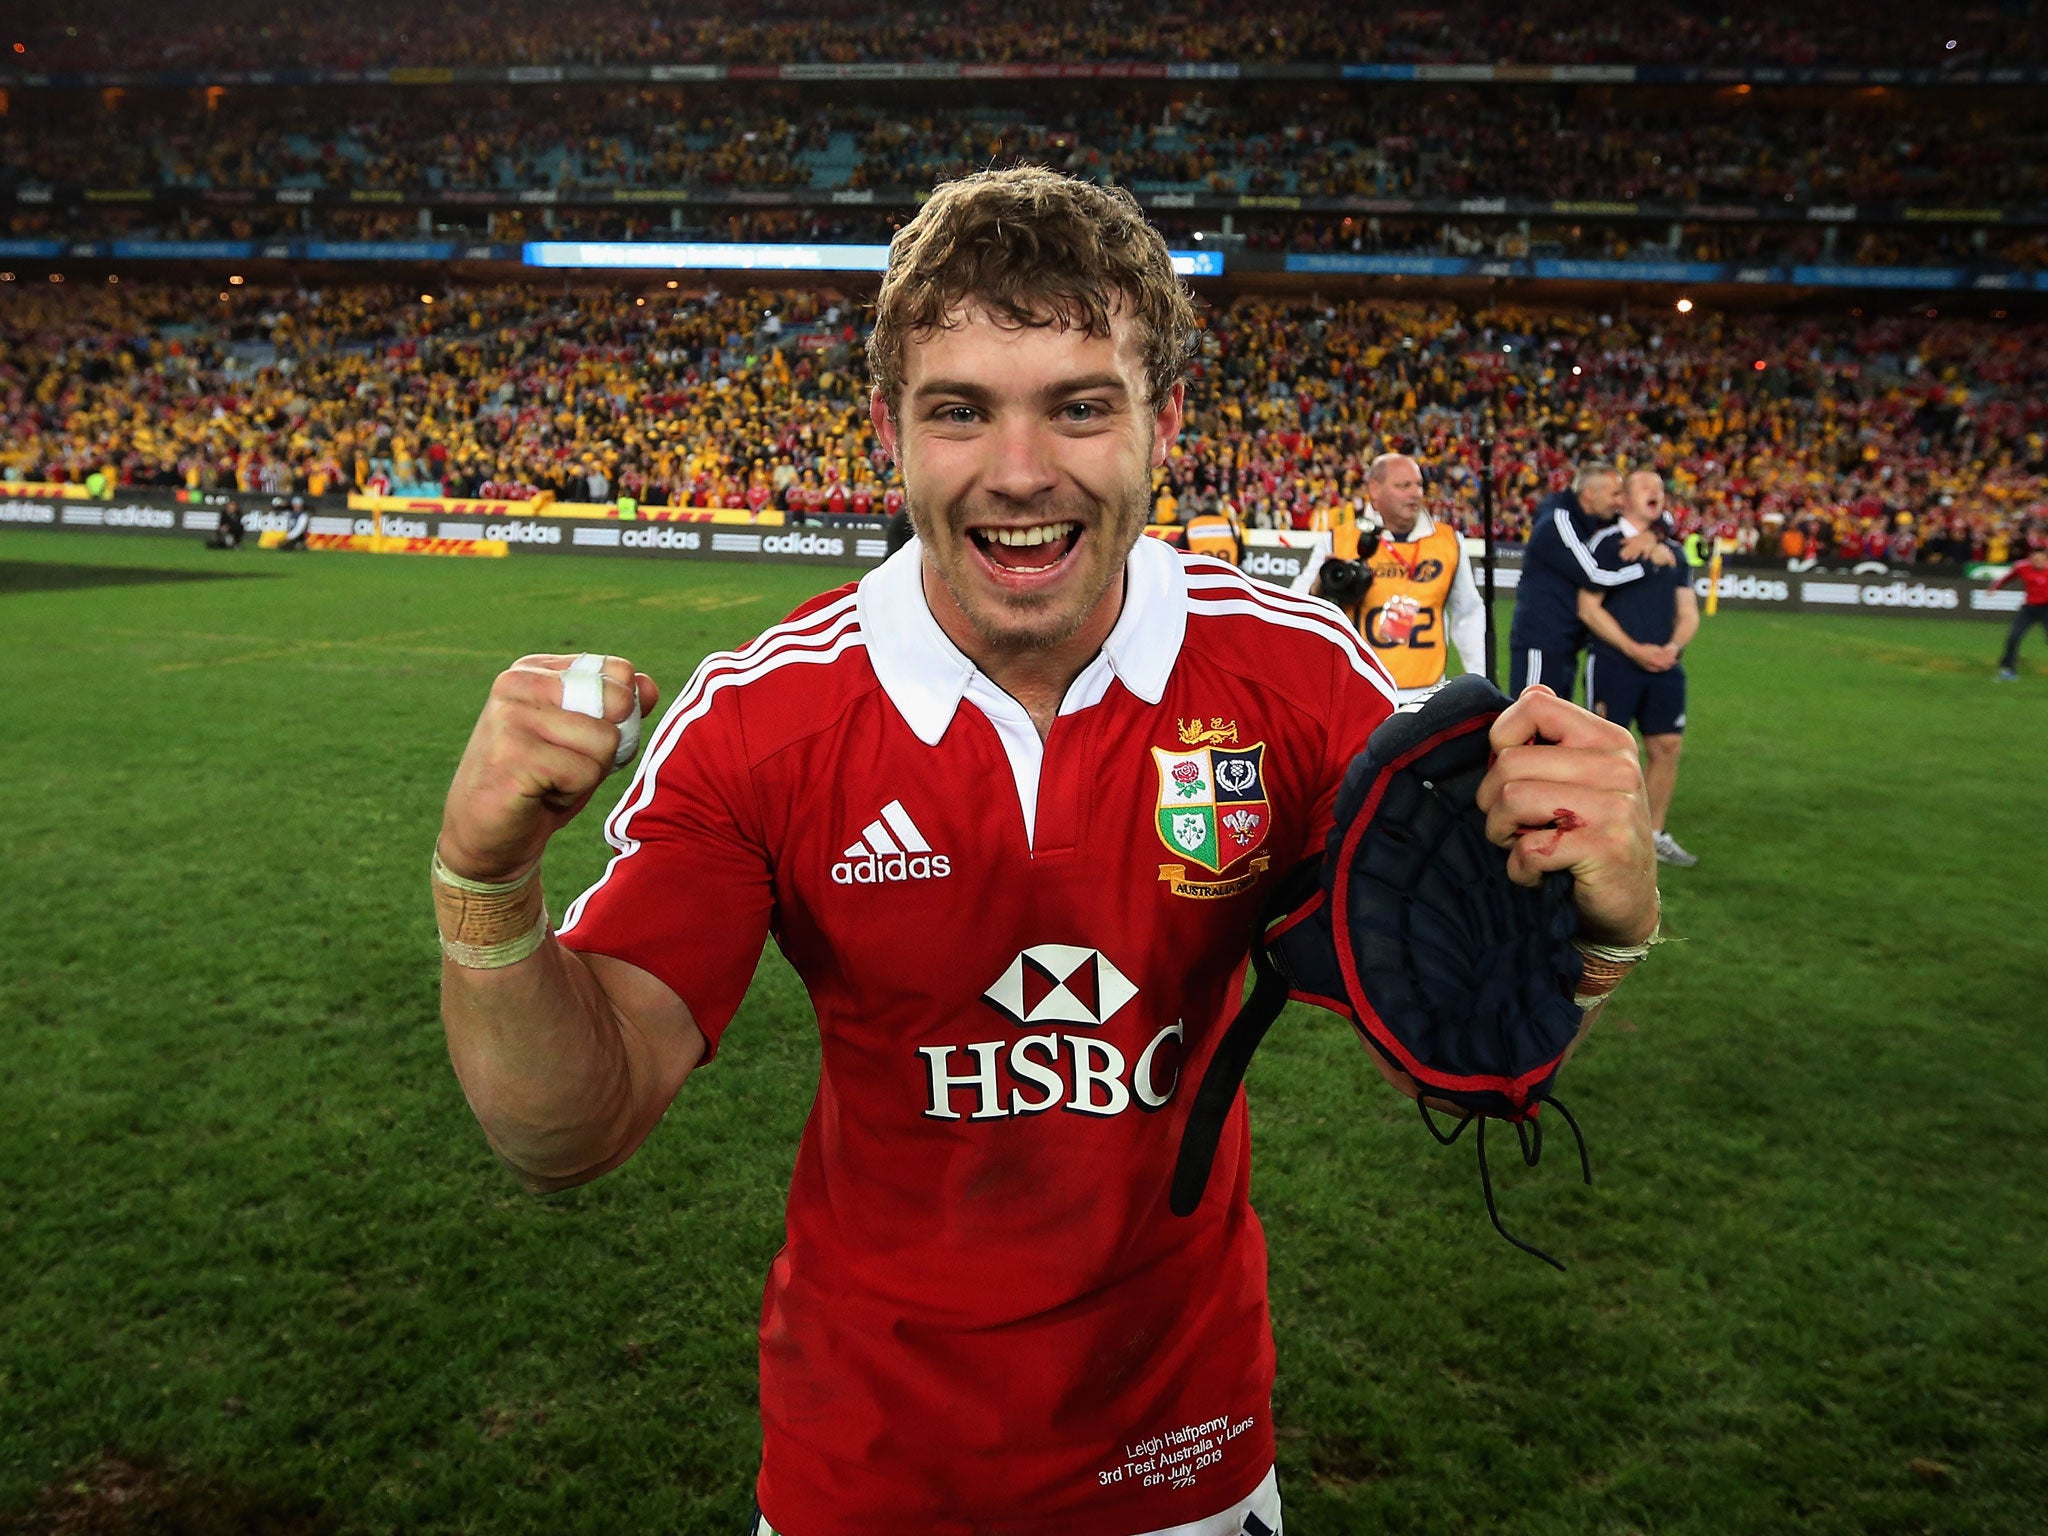 Leigh Halfpenny was named man of the series during the 2013 British and Irish Lions tour to Australia